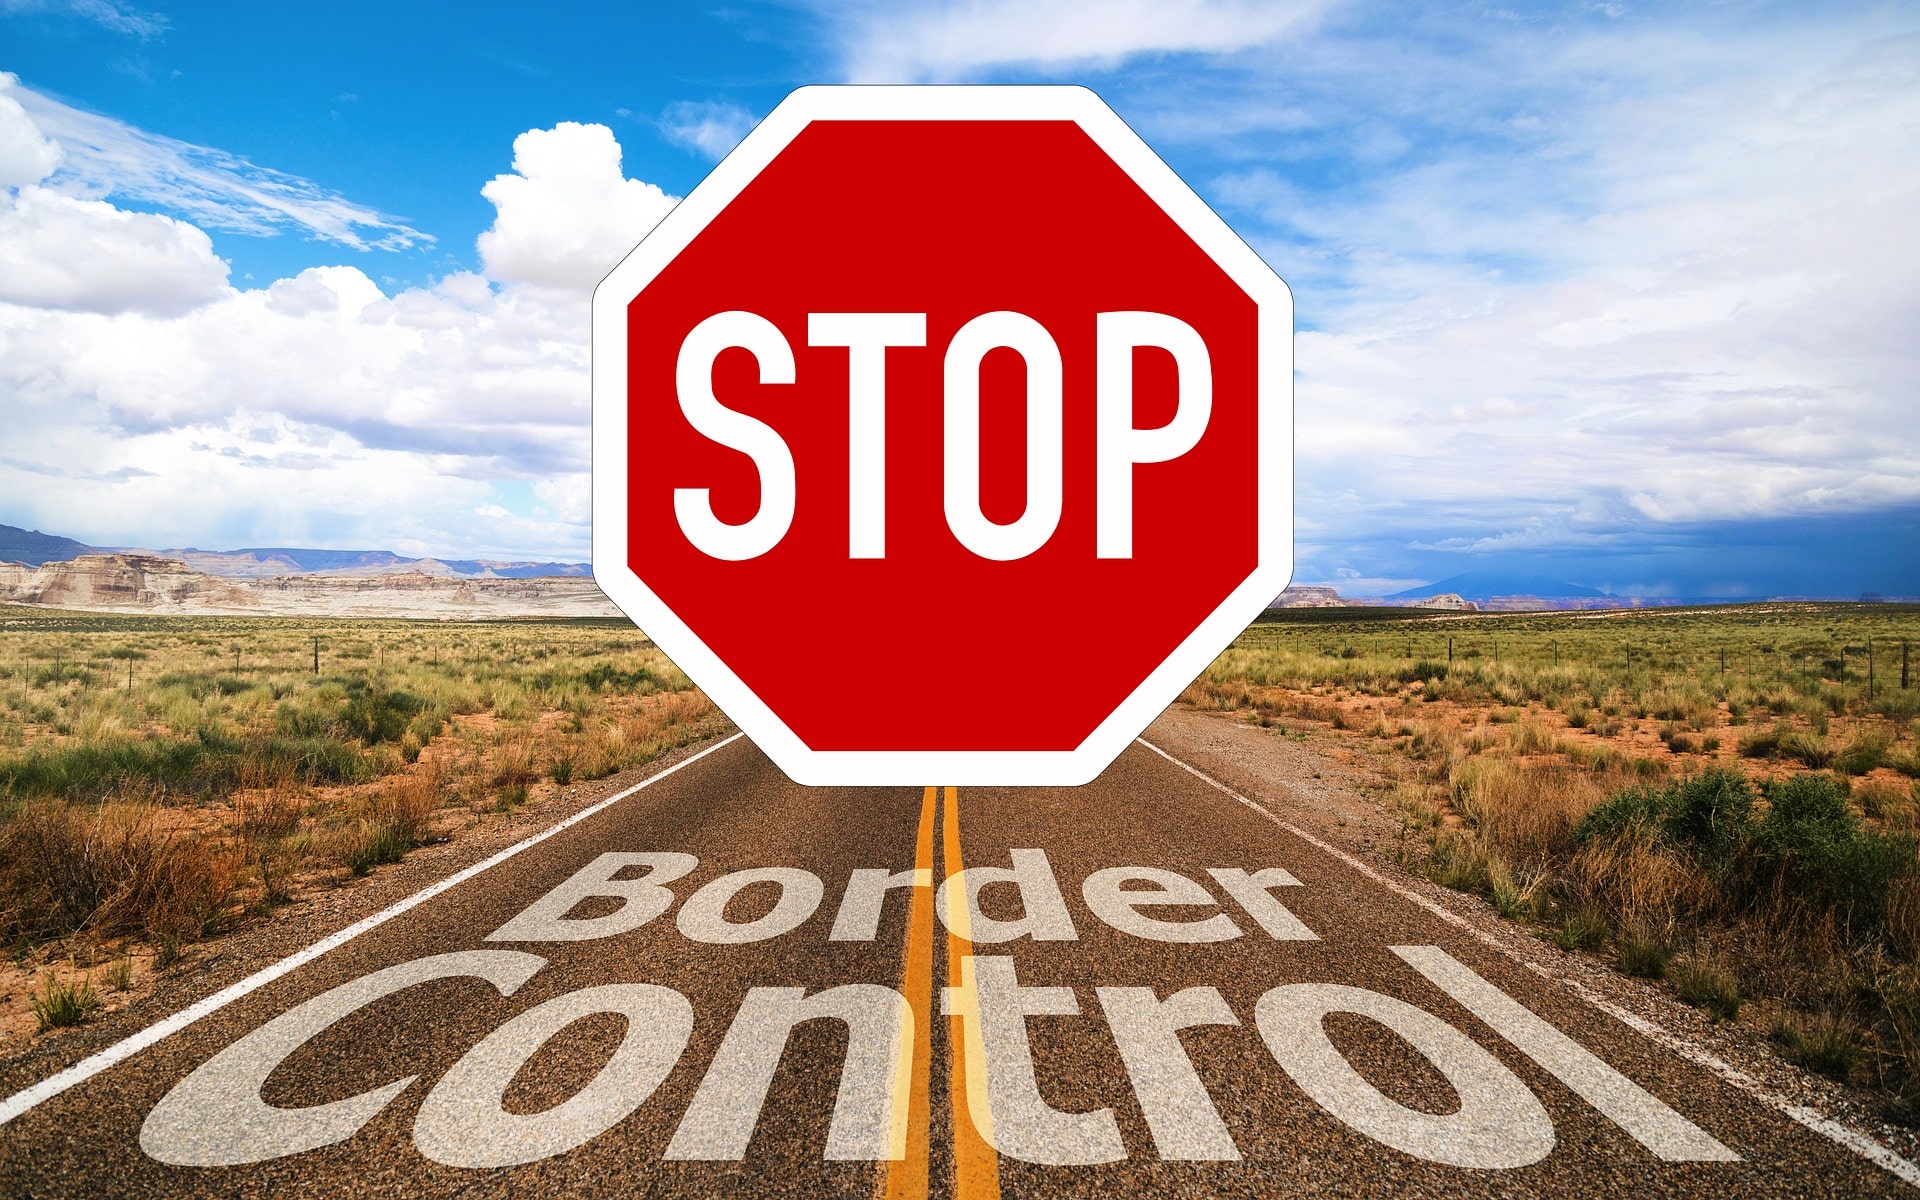 Road with a sign saying "Stop Border Control"